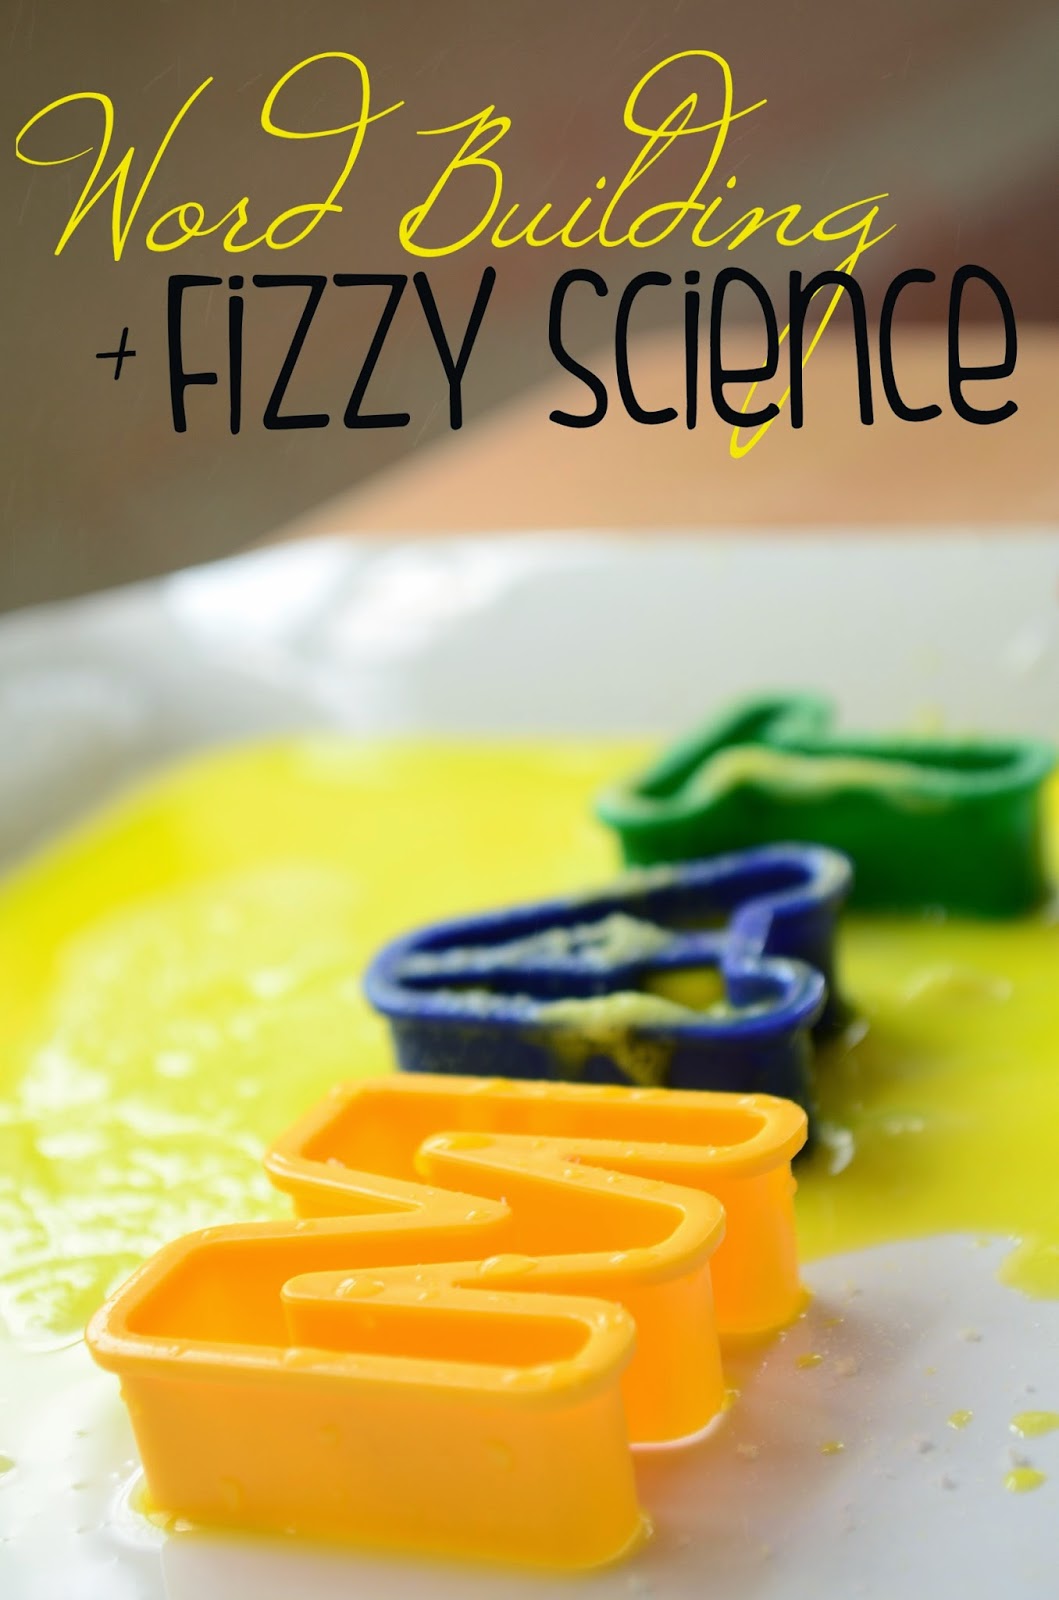 Kids Activity: Word Building with Fizzy Science